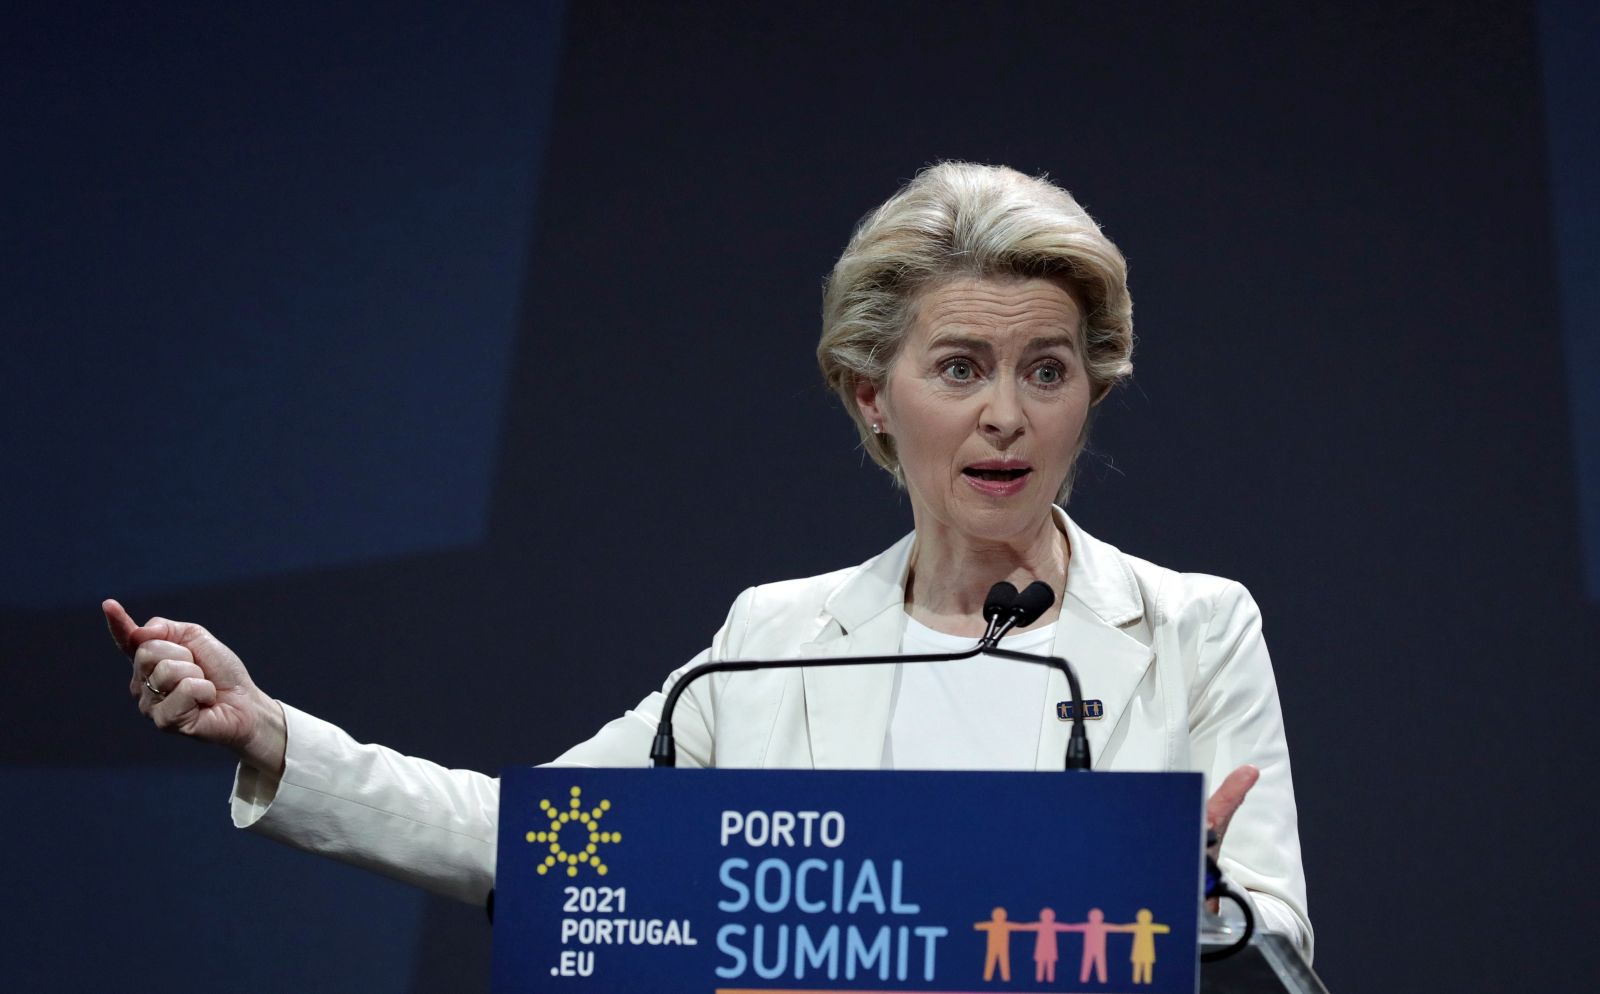 epa09184284 The President of the European Commission, Ursula von der Leyen attends a press conference after the closing session of the Social Summit at Alfândega do Porto, Portugal, 07 May 2021. The meeting takes place during the Portuguese Presidency of the Council of the European Union.  EPA/ESTELA SILVA / POOL